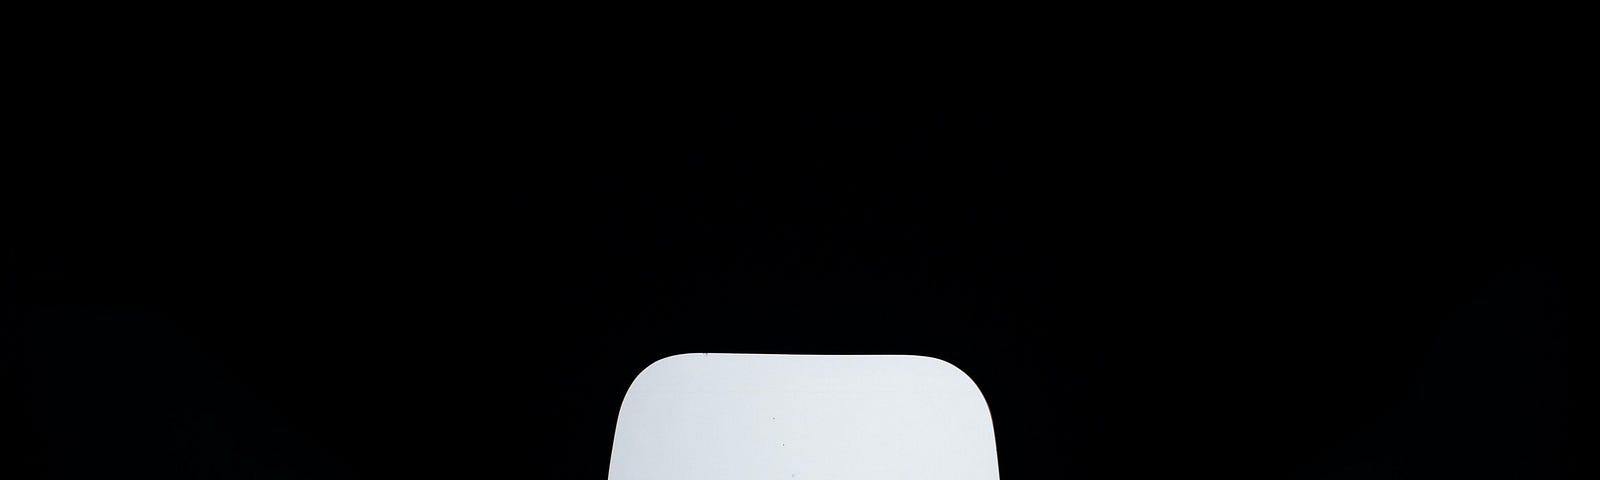 Dark background with a lone white chair